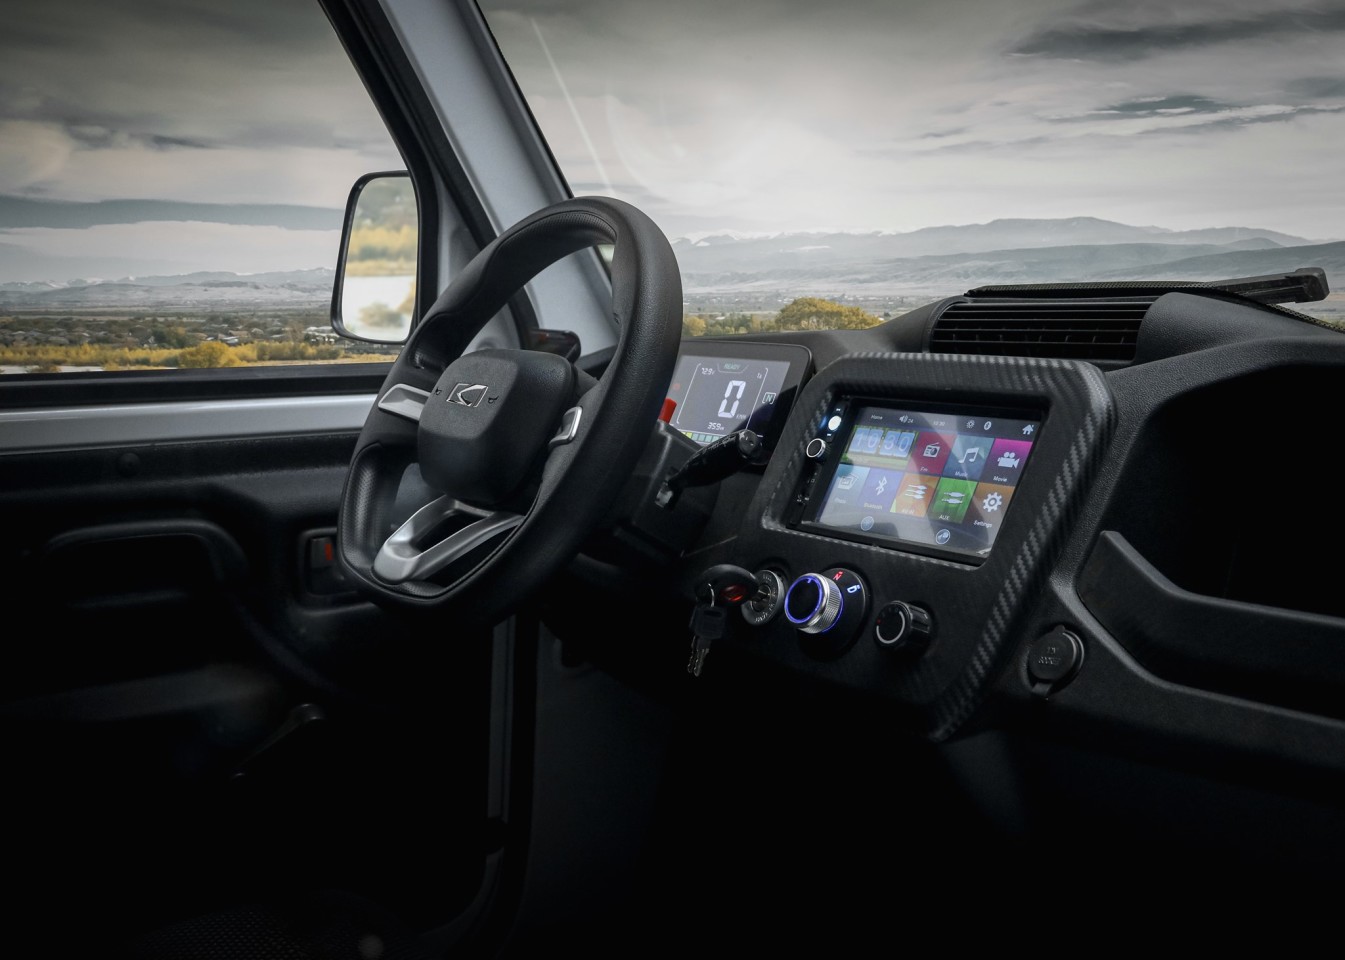 The Pickman XR features a multimedia LCD infotainment touchscreen display